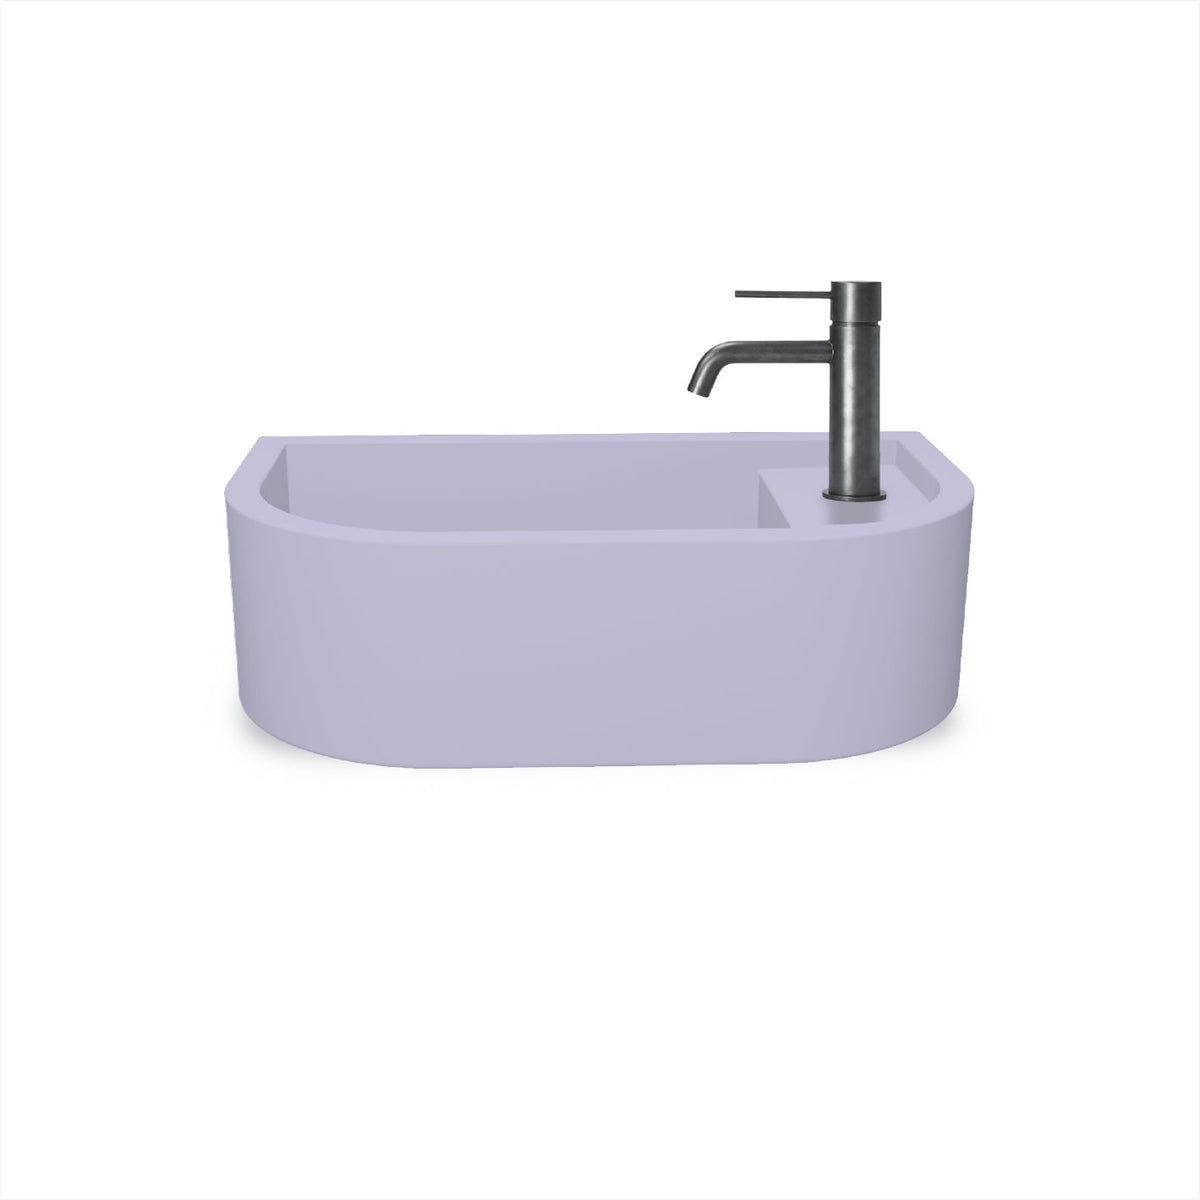 Loop 01 Basin - Surface Mount (Lilac,Tap Hole)